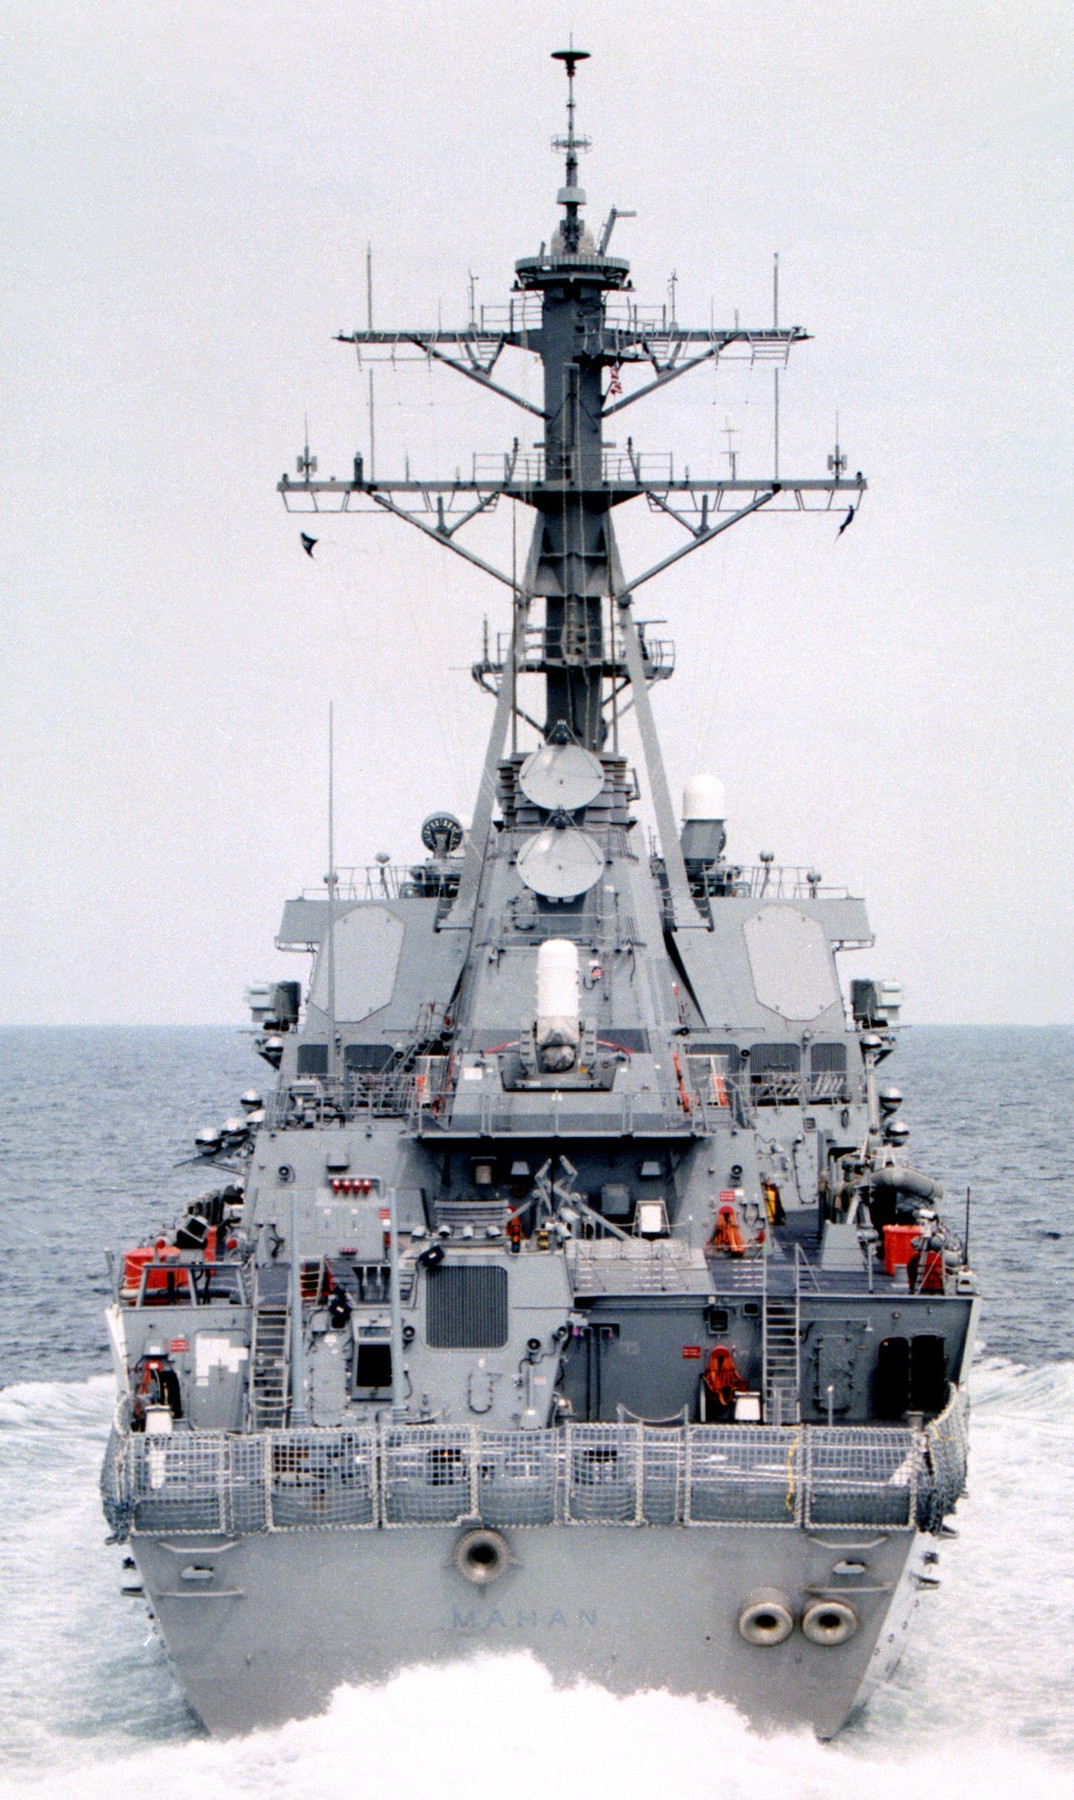 ddg-72 uss mahan guided missile destroyer arleigh burke class aegis bmd 47